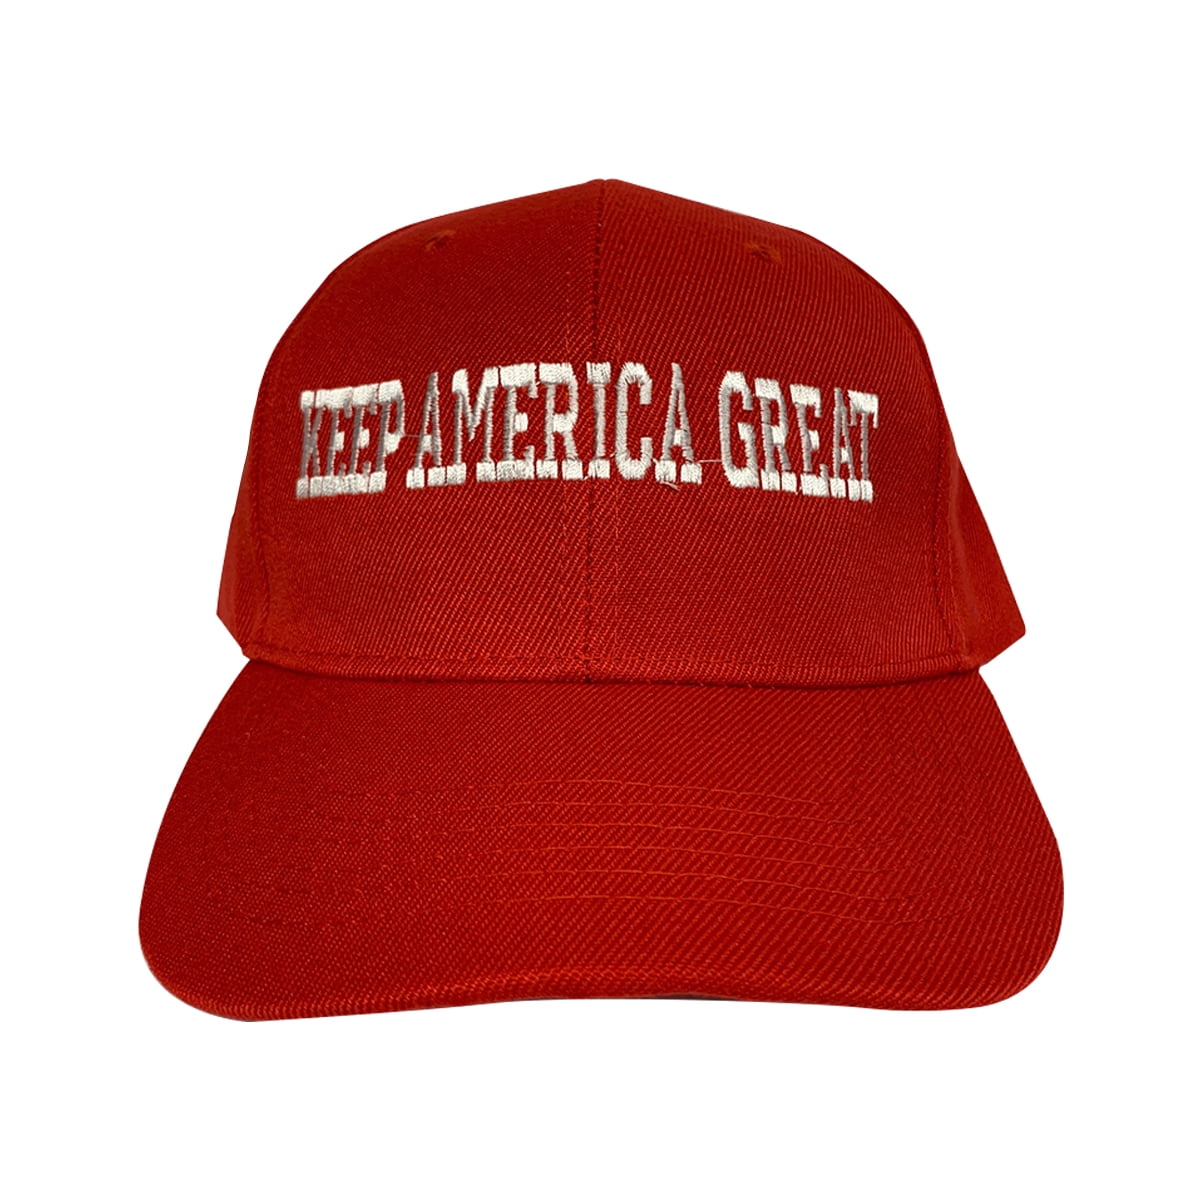 Red MAGA Make America Great Again President Donald Trump Hat Cap Embroidered USA 